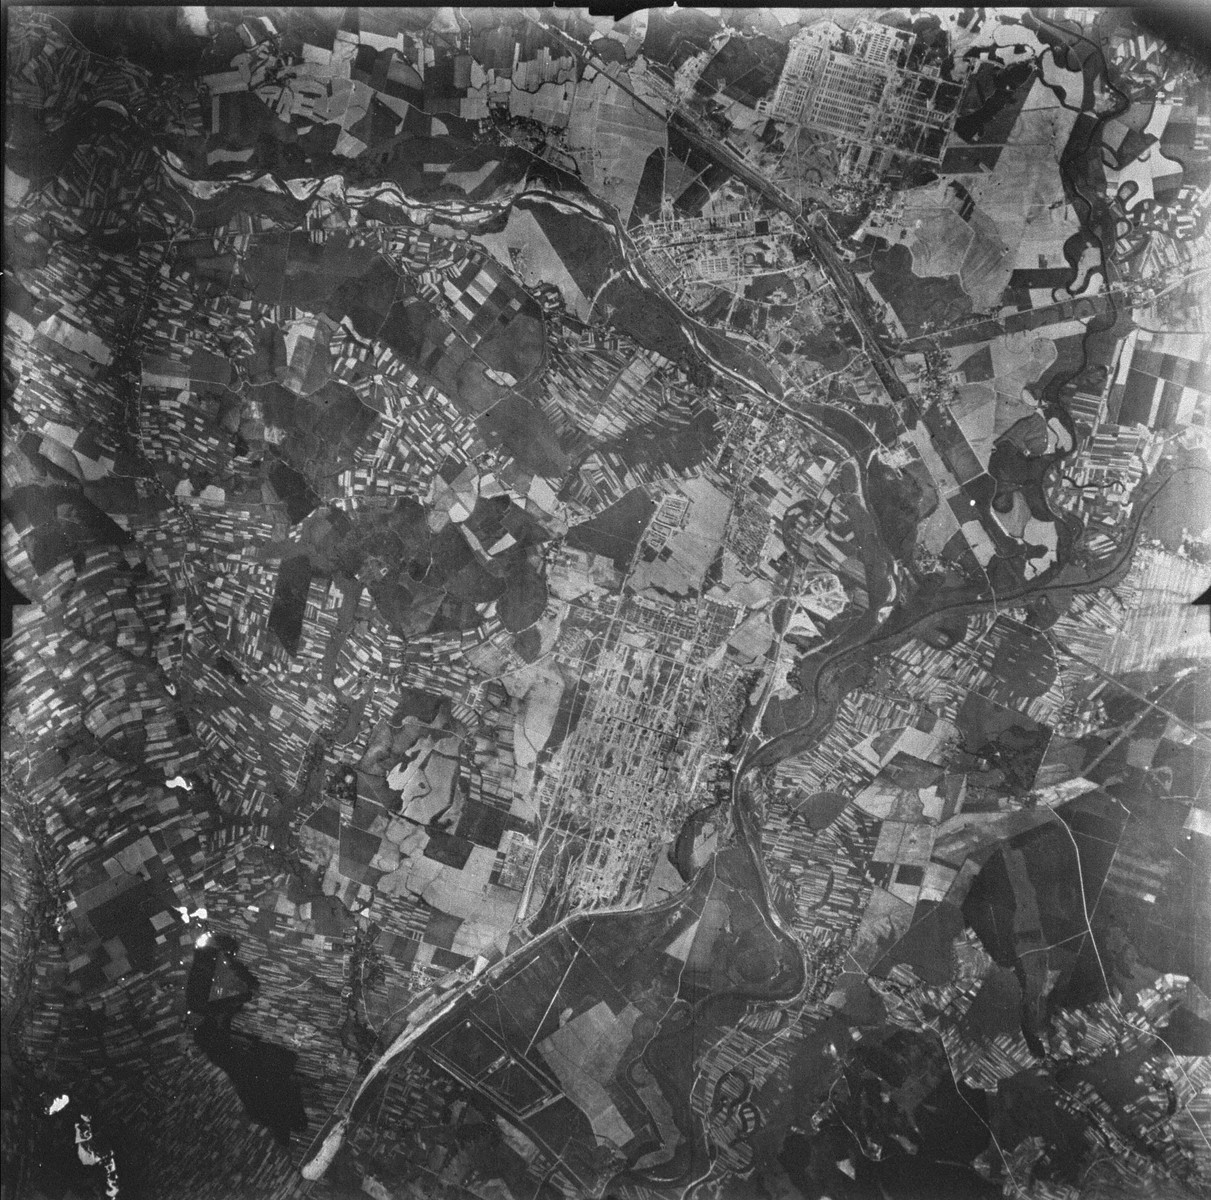 An aerial reconnaissance photograph of the Auschwitz area showing the three main camps , Auschwitz I, Auschwitz II (Birkenau), and Auschwitz III (Monowitz), as well as the I.G. Farben complex. The image demonstrates the relative size of the three camps.  [oversized photograph]

Mission:  60 PRS/462 60 SQ;  Scale: 1/54,000;  Focal Length: 6";  Altitude: 27,000'